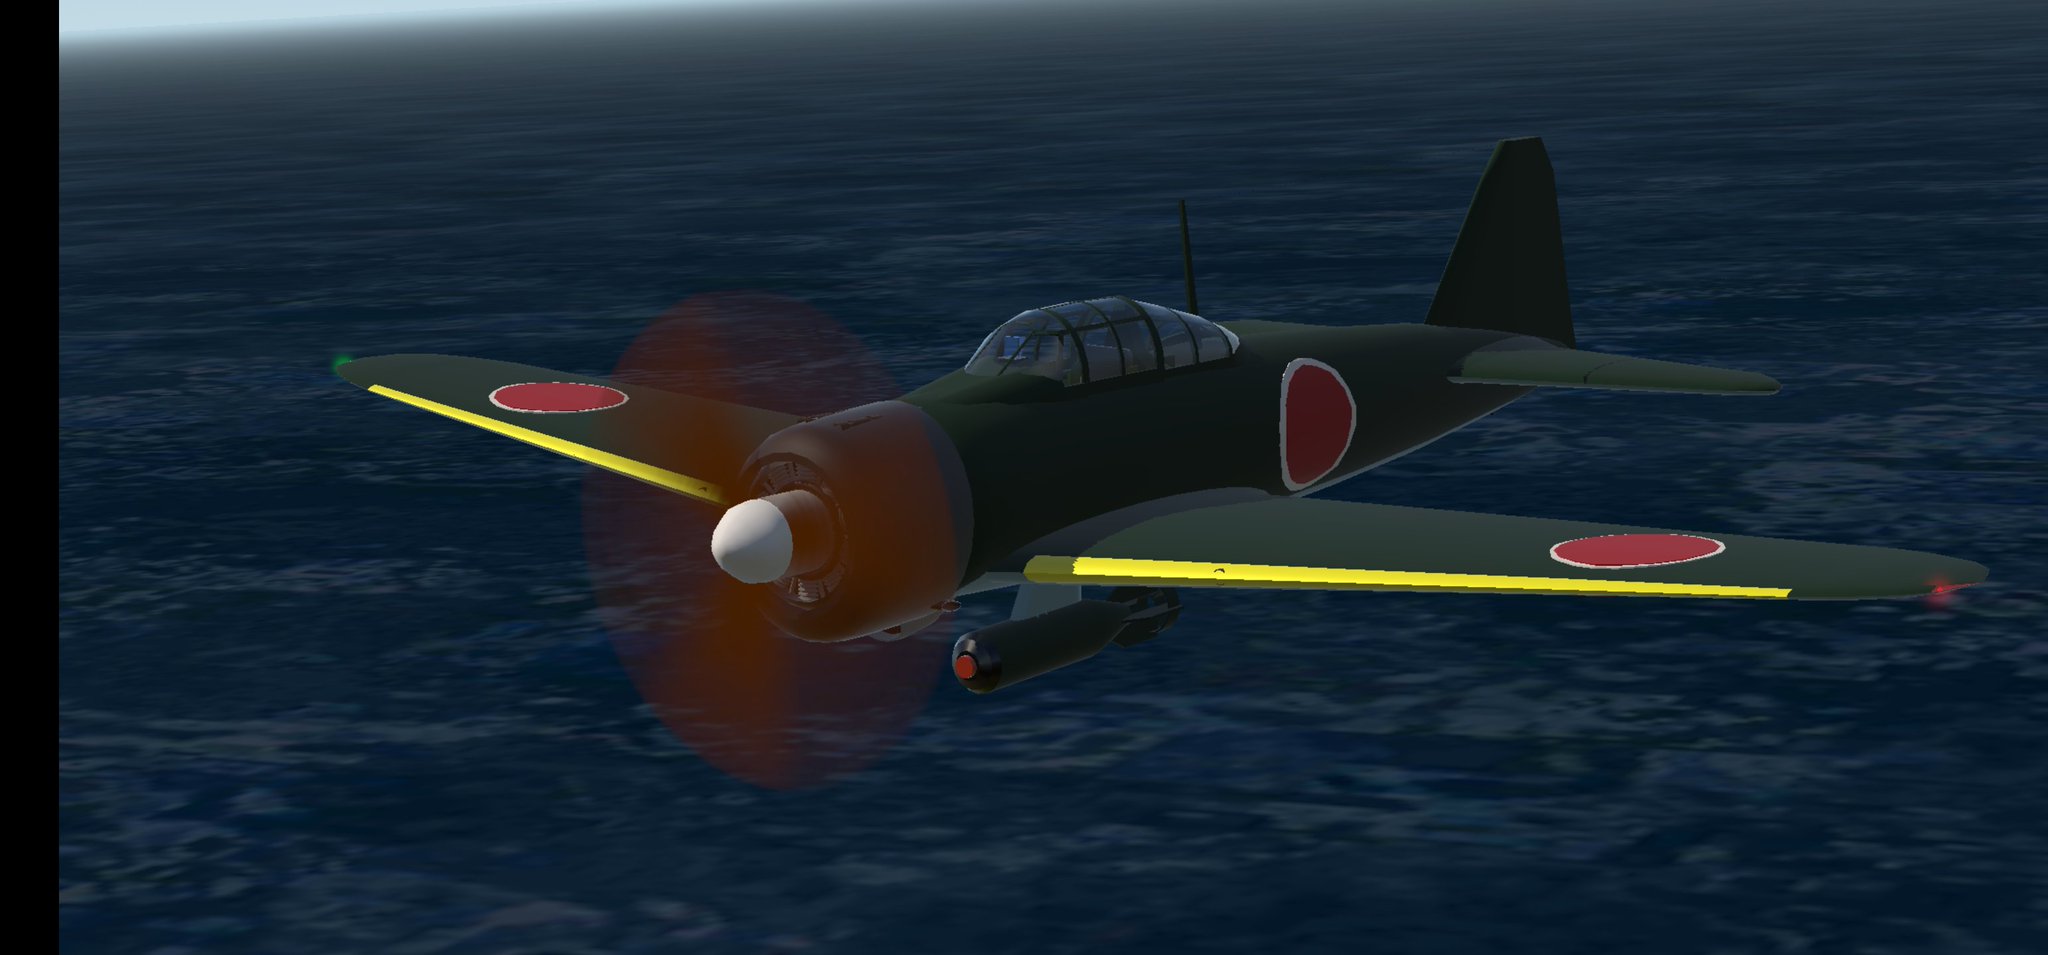 for example 2(A6M ZERO